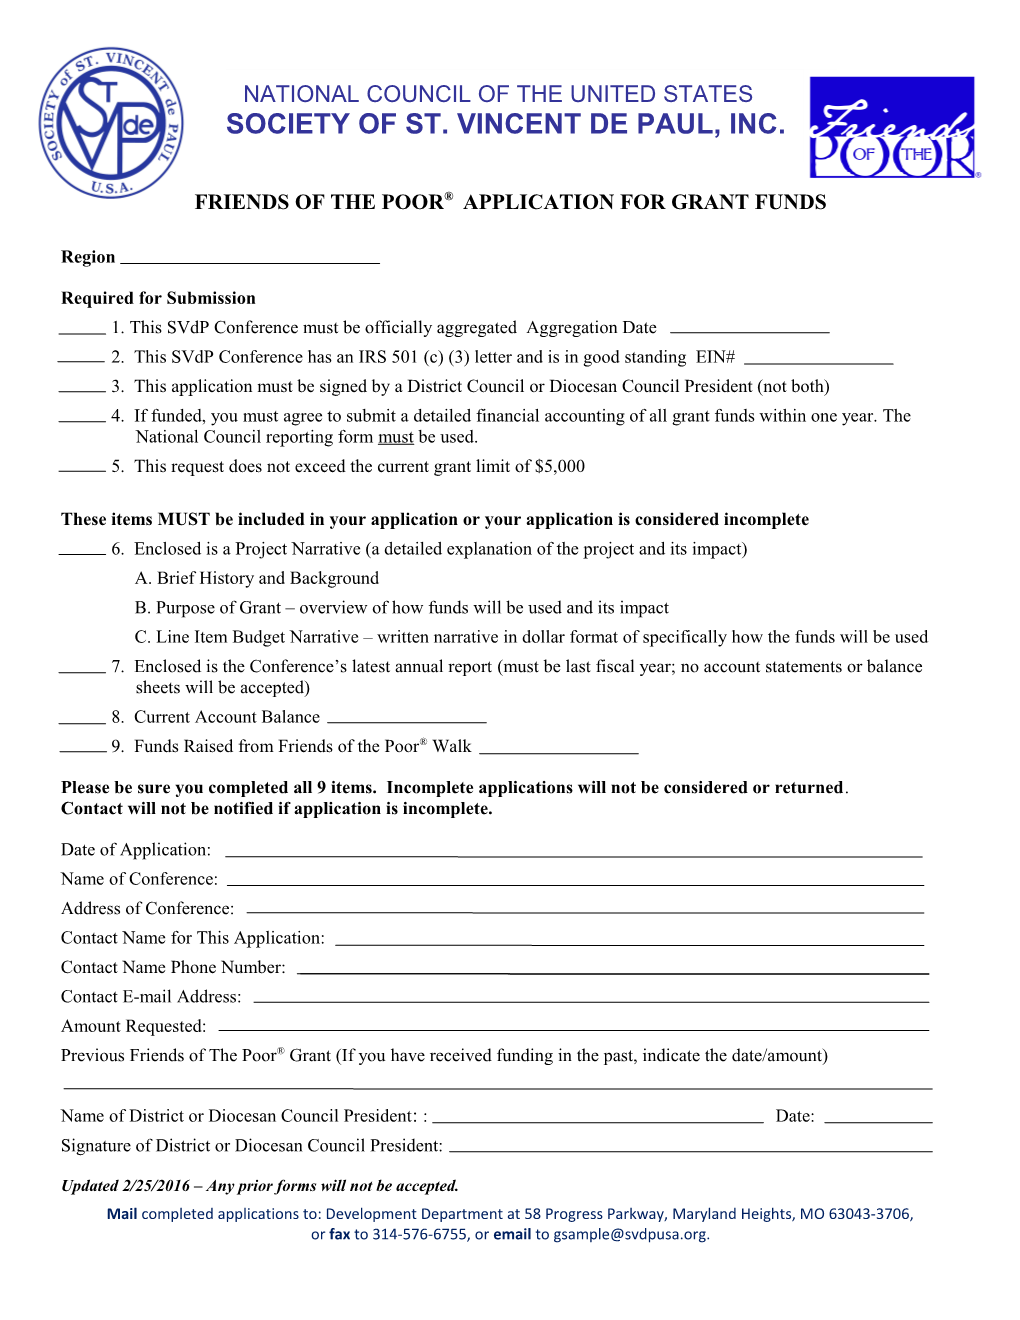 Friends of the Poor Application for Grant Funds